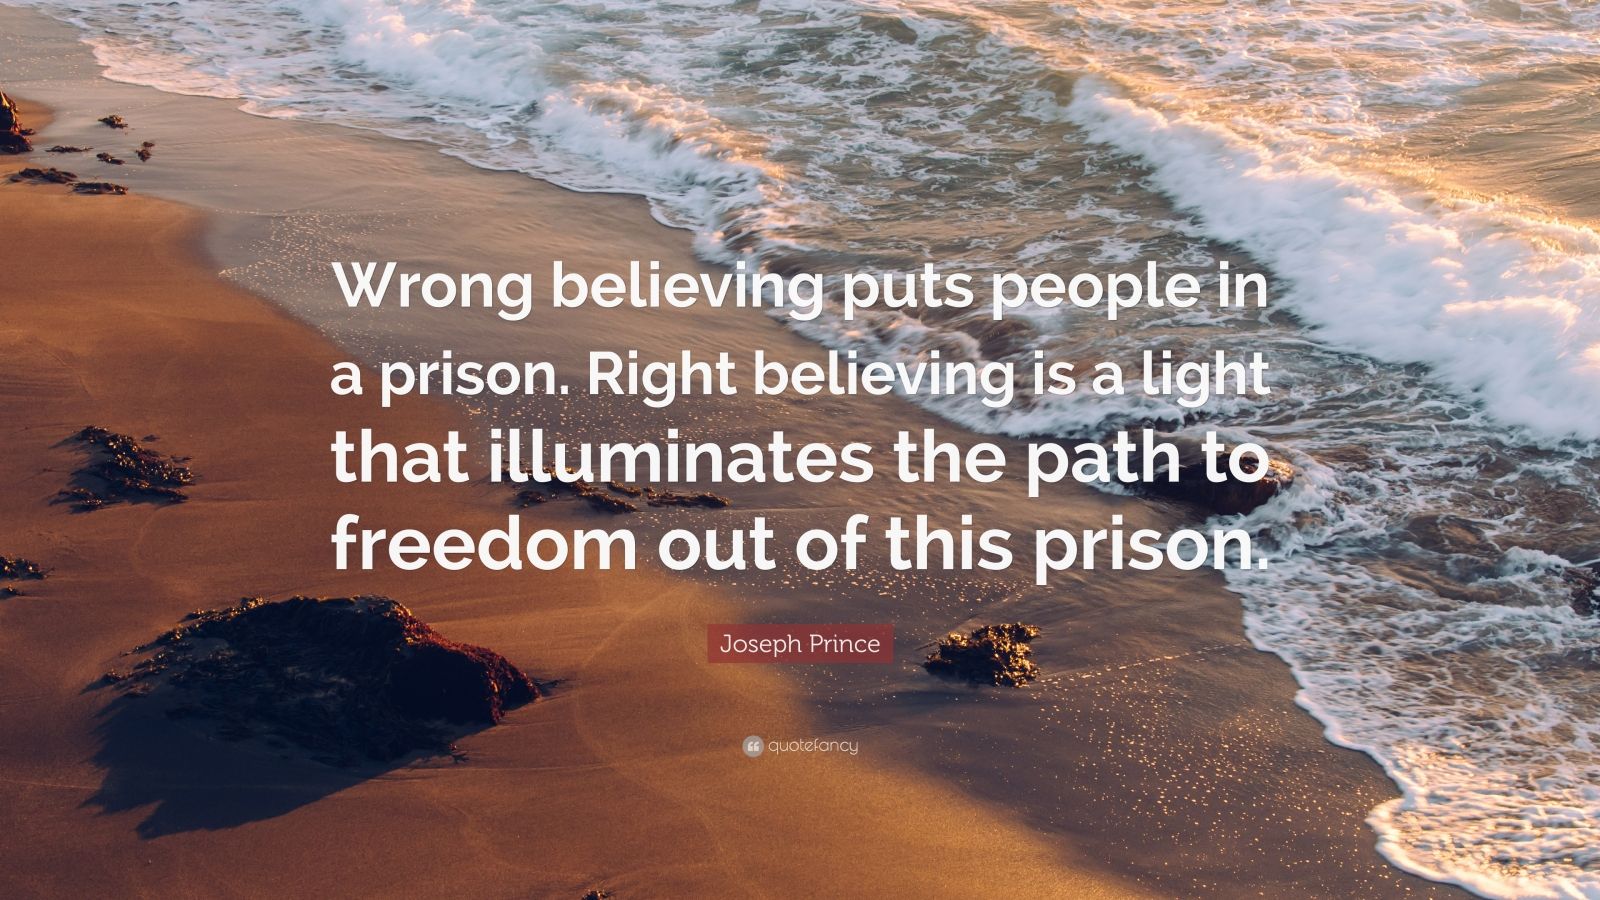 right believing is a light that illuminates the path to freedom